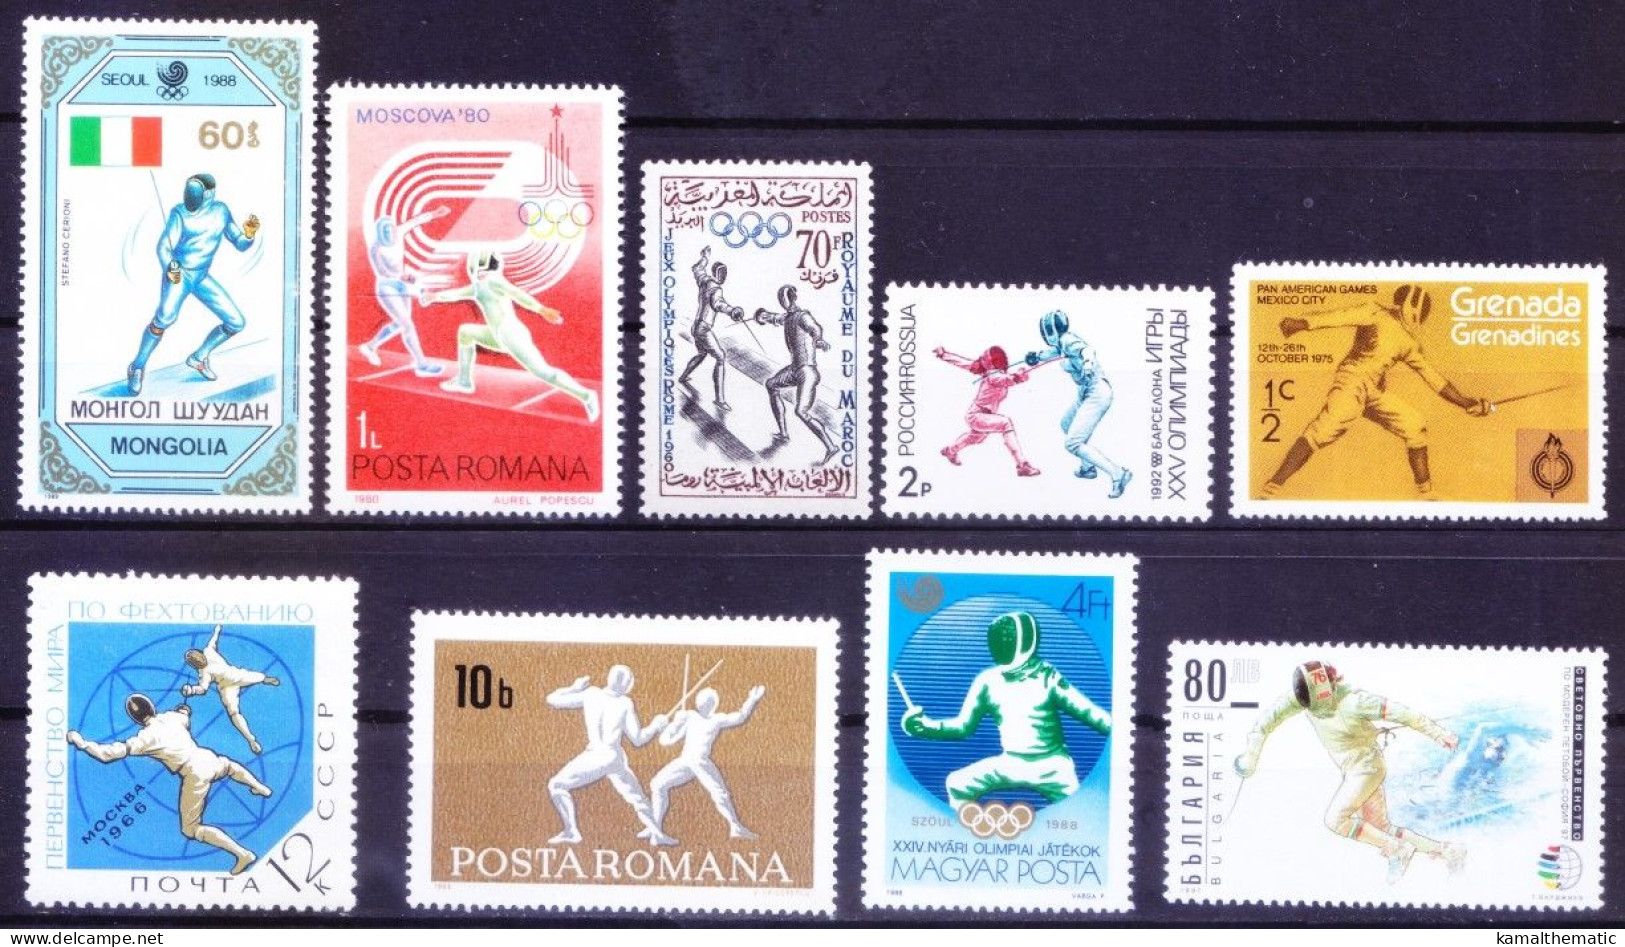 Fencing, Sword Fighting, Sports, Olympic, 9 Different MNH Stamps - Escrime